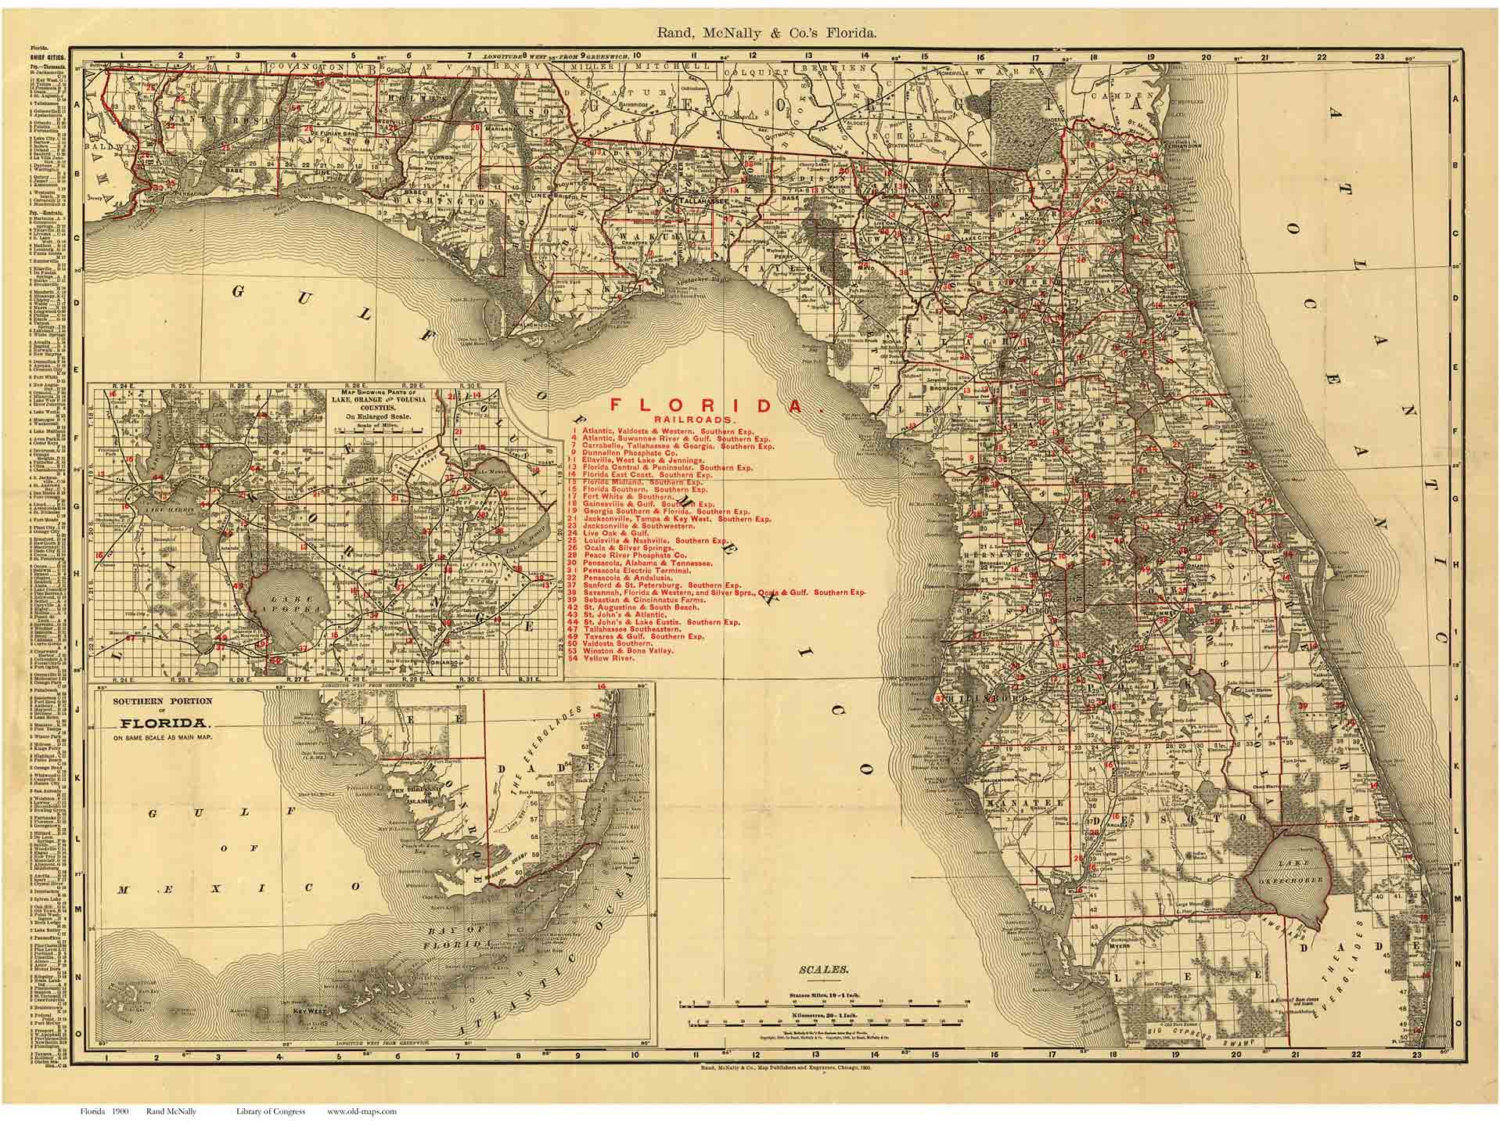 Florida 1900 State Map by Rand McNally & Co. Reprint